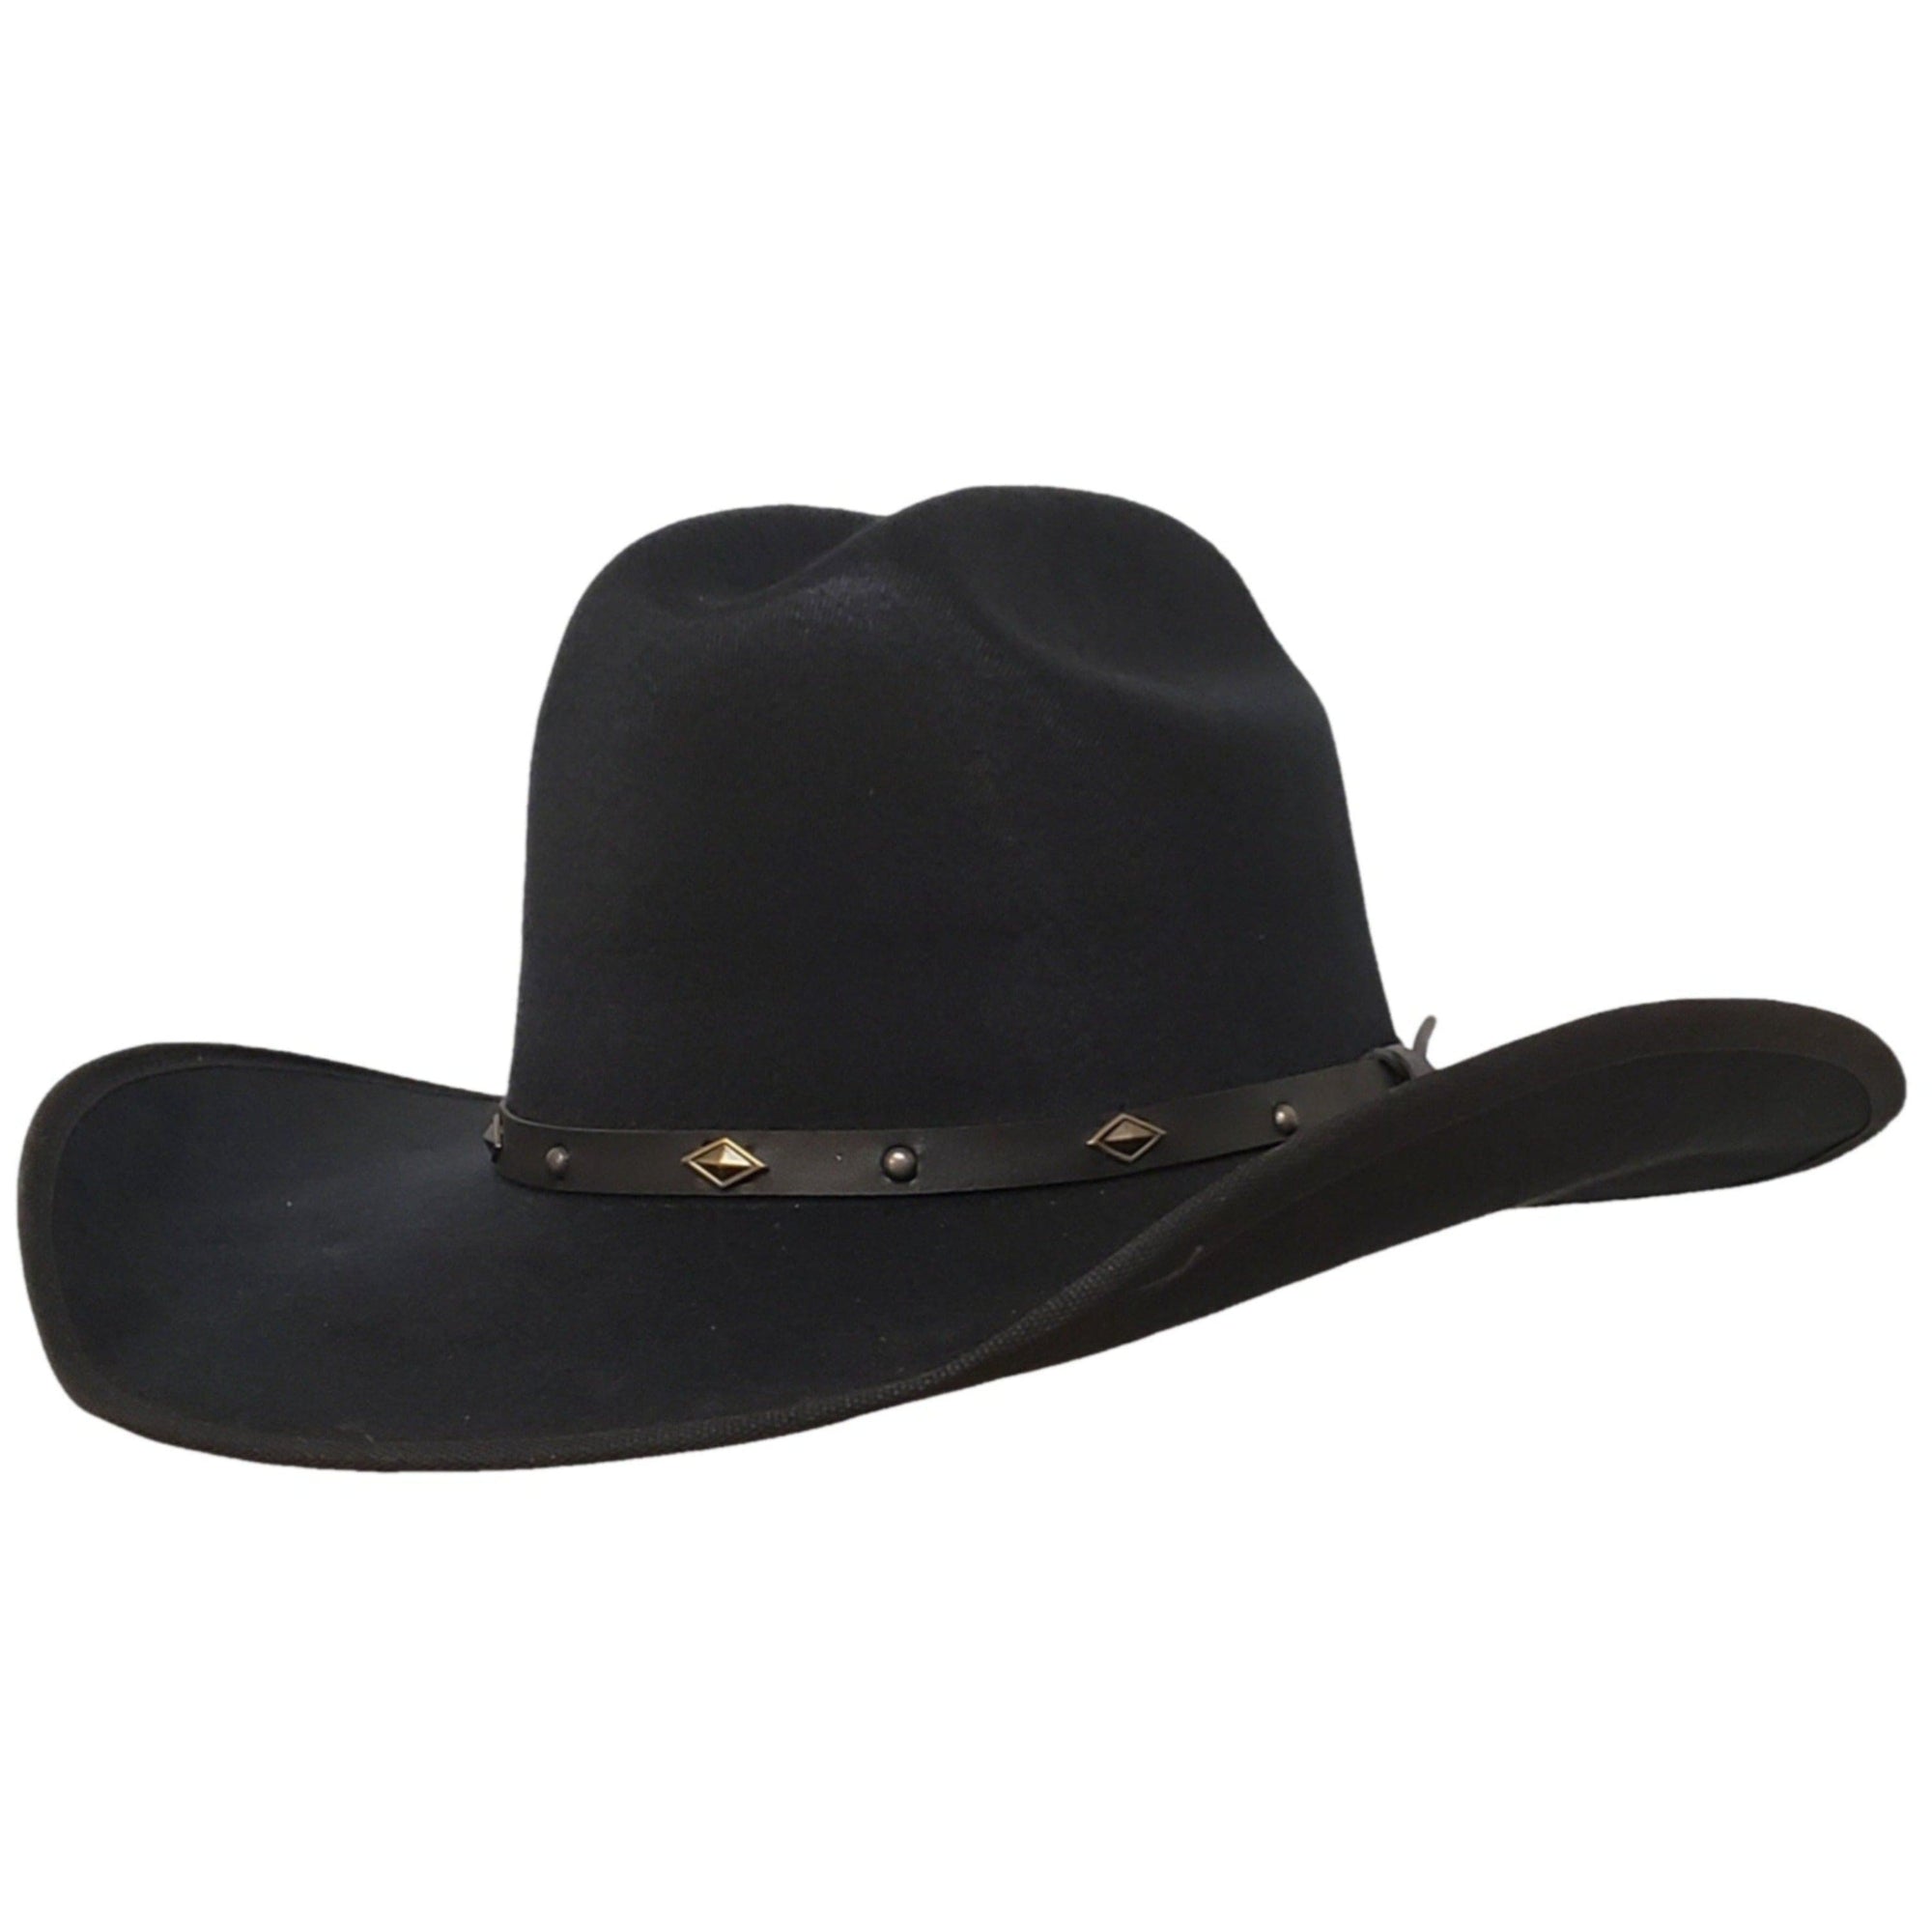 Gone Country Hats Men & Women's Hats Small  fits 6-7/8 to 7 San Antonio Black - Cotton (Yellowstone Series)